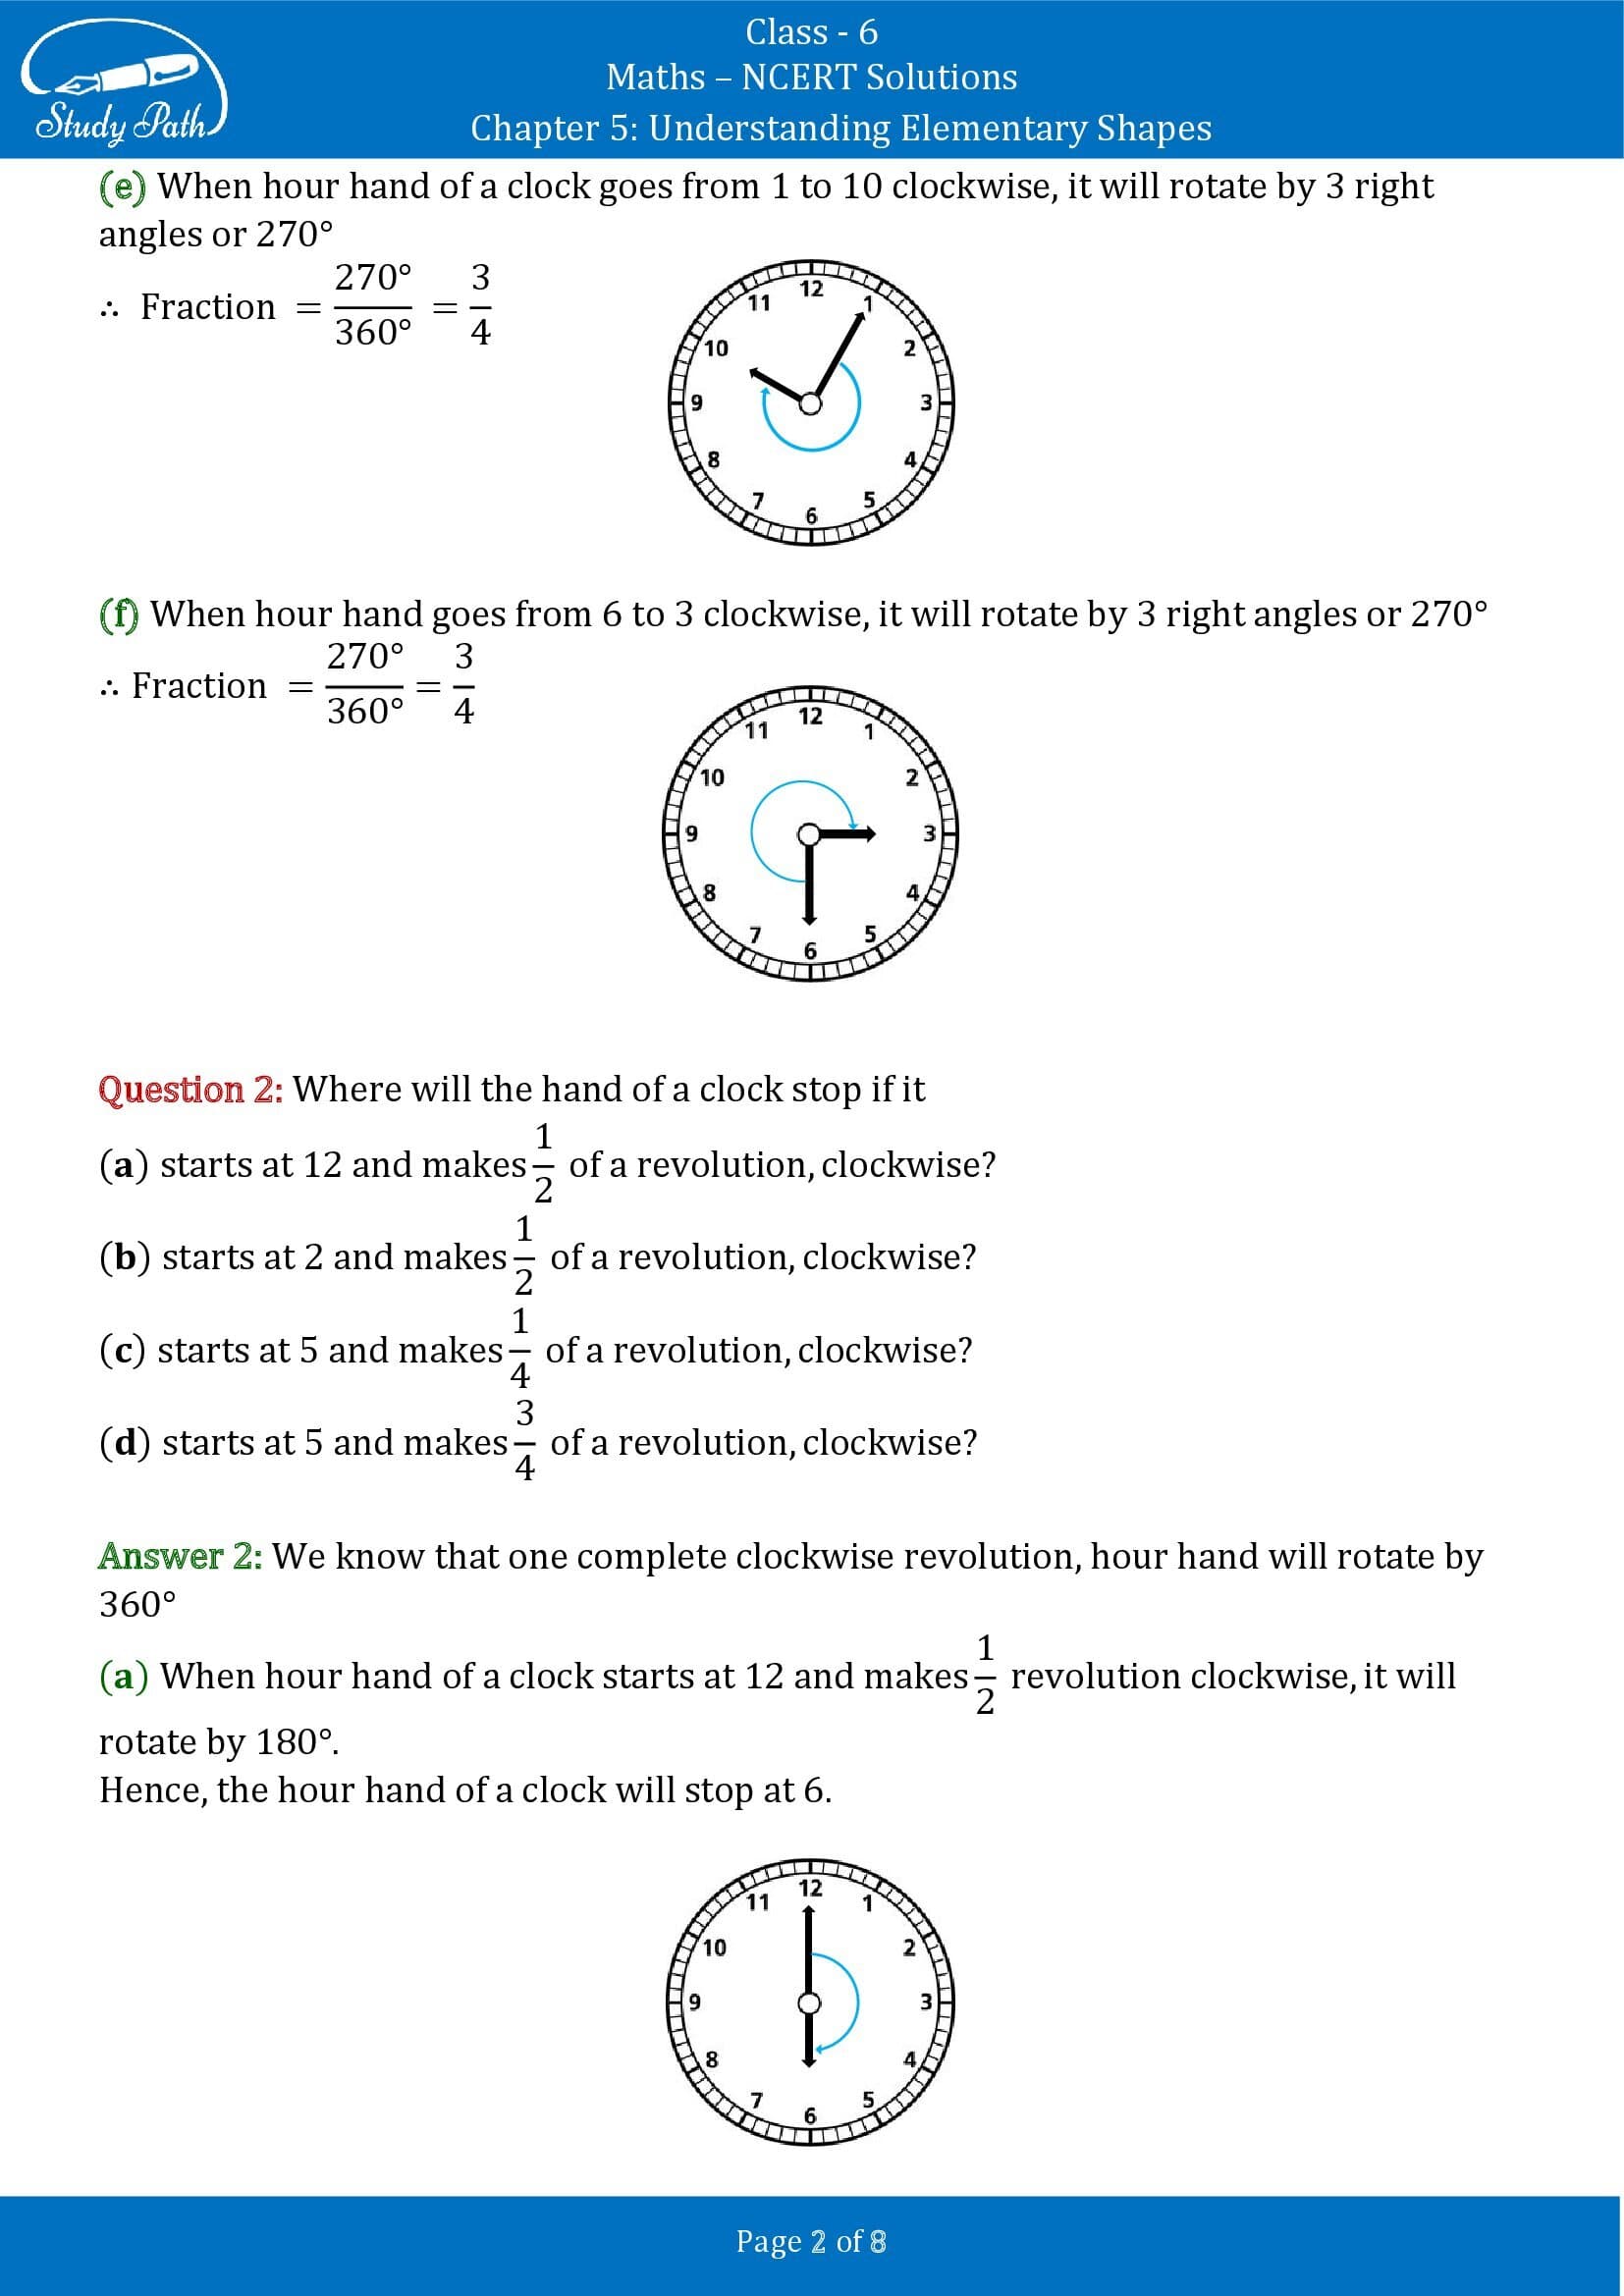 NCERT Solutions for Class 6 Maths Chapter 5 Understanding Elementary Shapes Exercise 5.2 00002